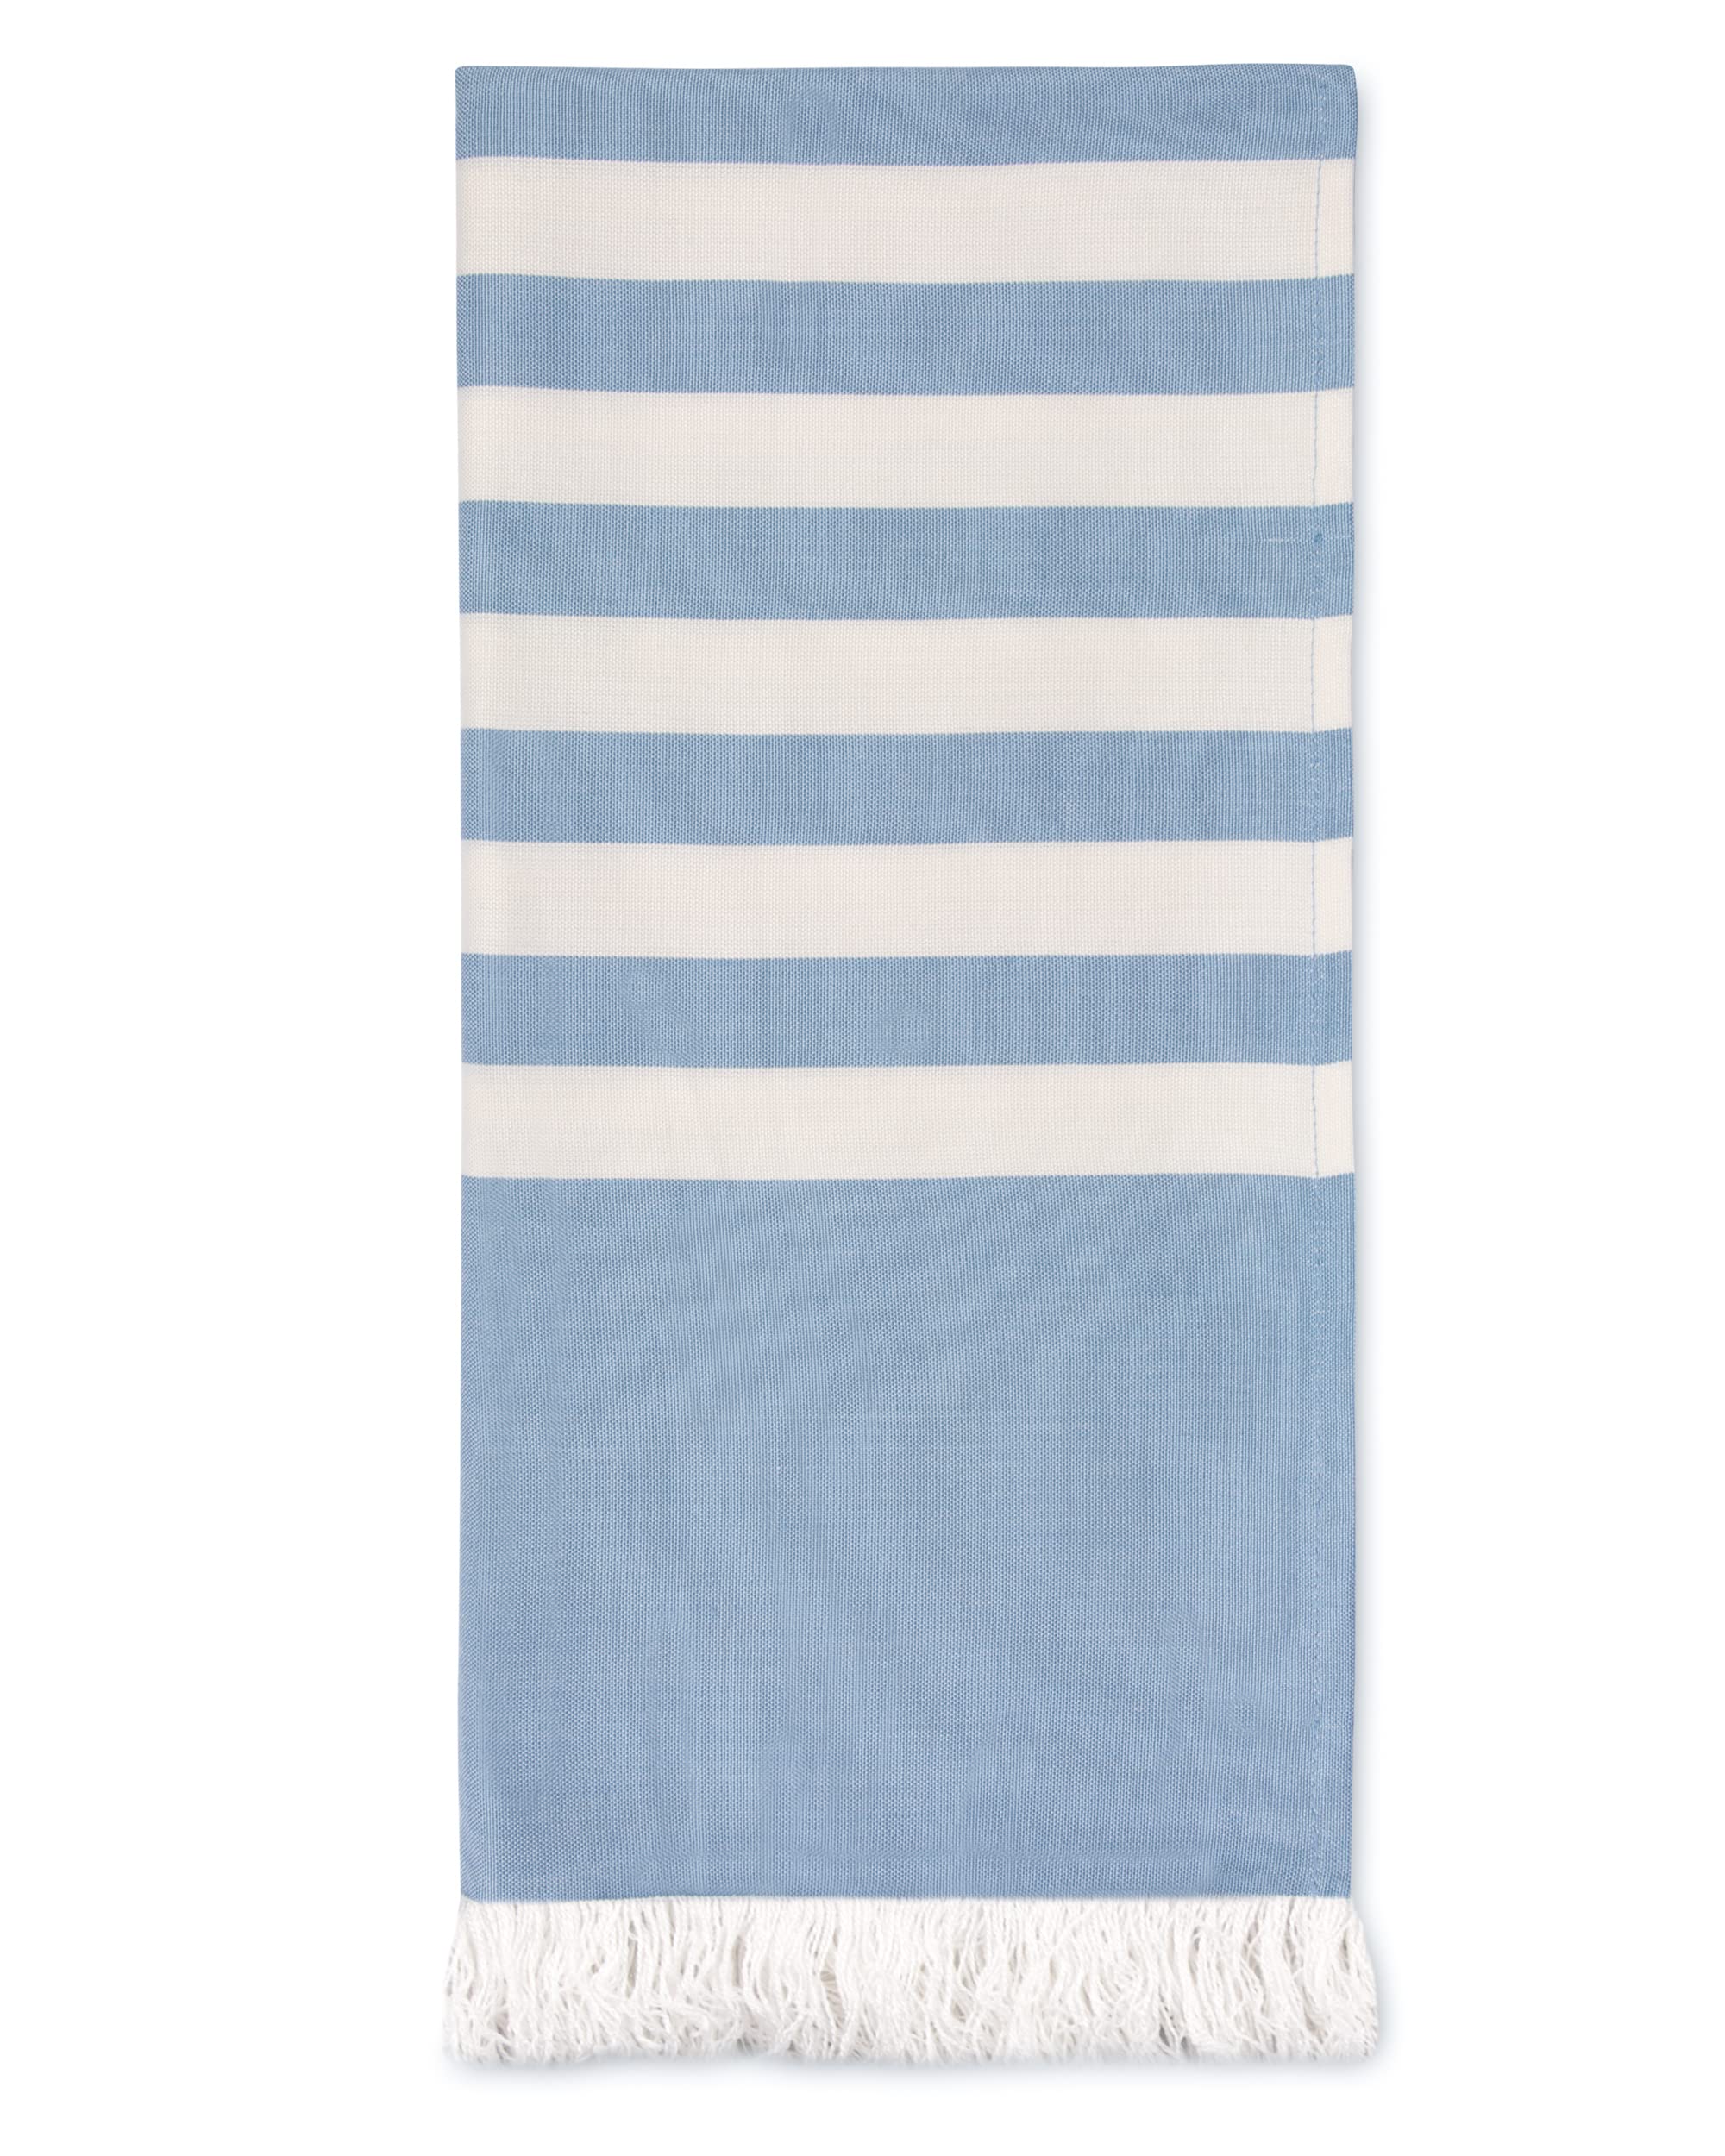 Mush 100% Bamboo Light Weight & Ultra-Compact Turkish Towel Super Soft, Absorbent, Quick Dry,Anti-Odor Bamboo Towel for Bath,Travel,Gym, Swim and Workout (1, Muted Blue)